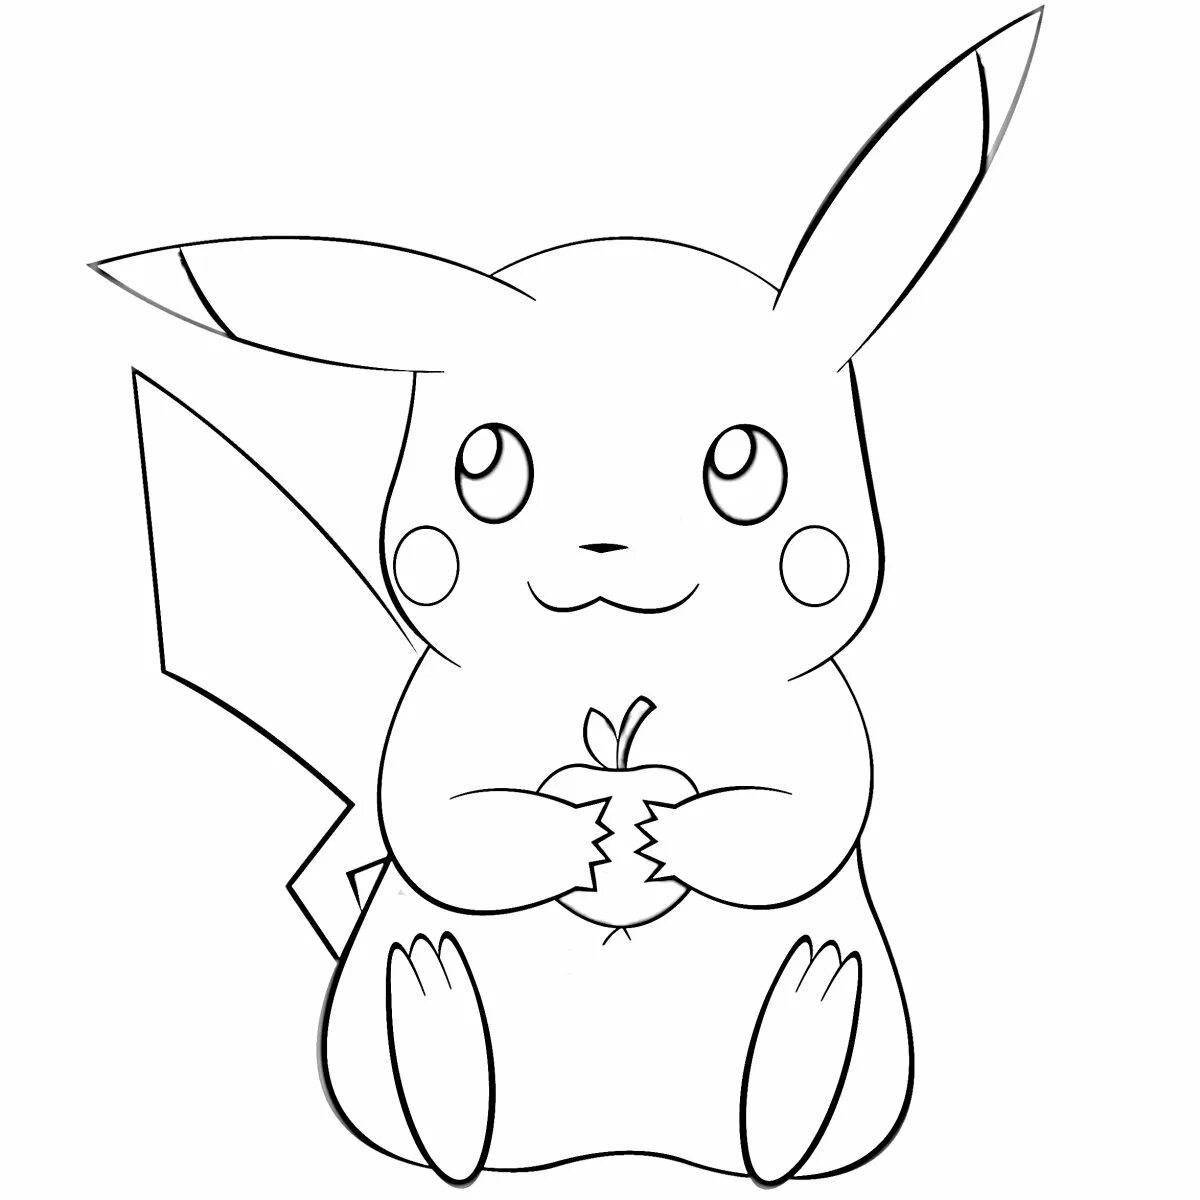 Exciting pikachu figurine coloring page